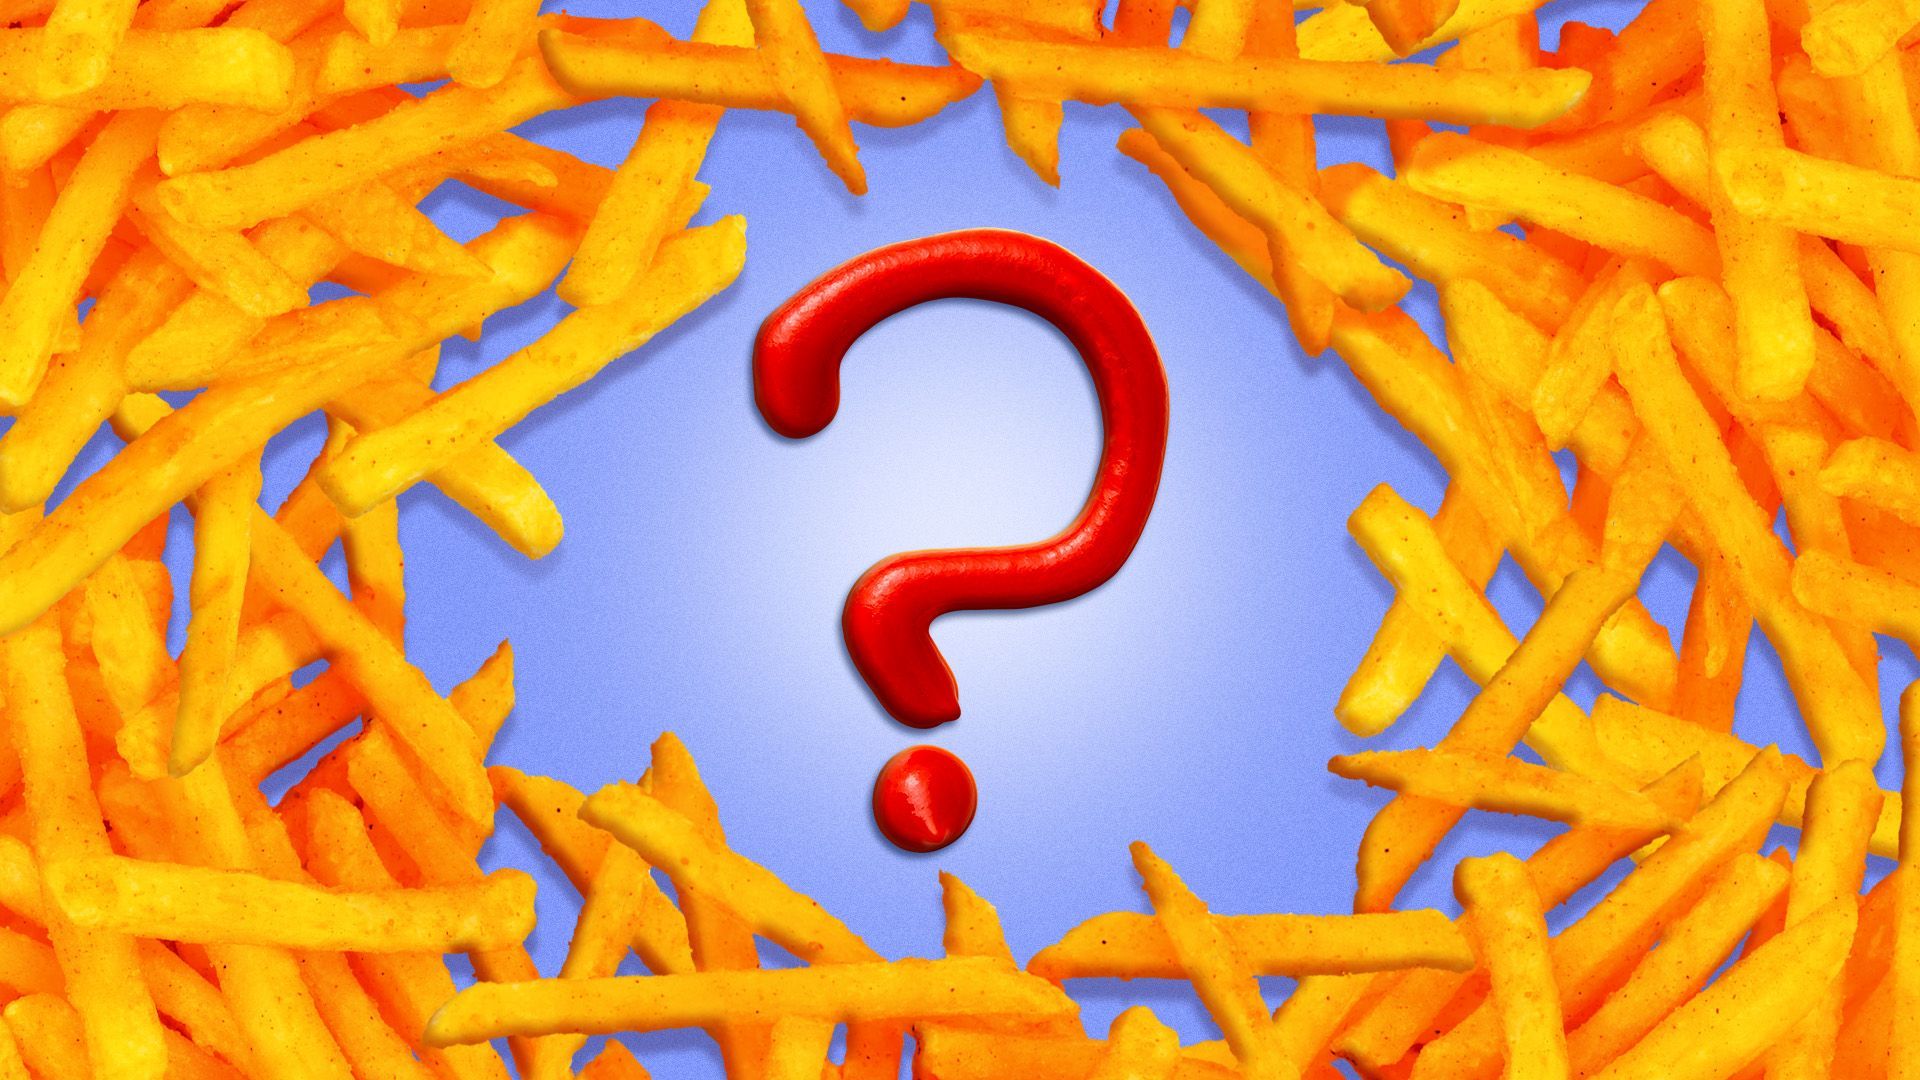 Illustration of a question mark made out of ketchup surrounded by french fries